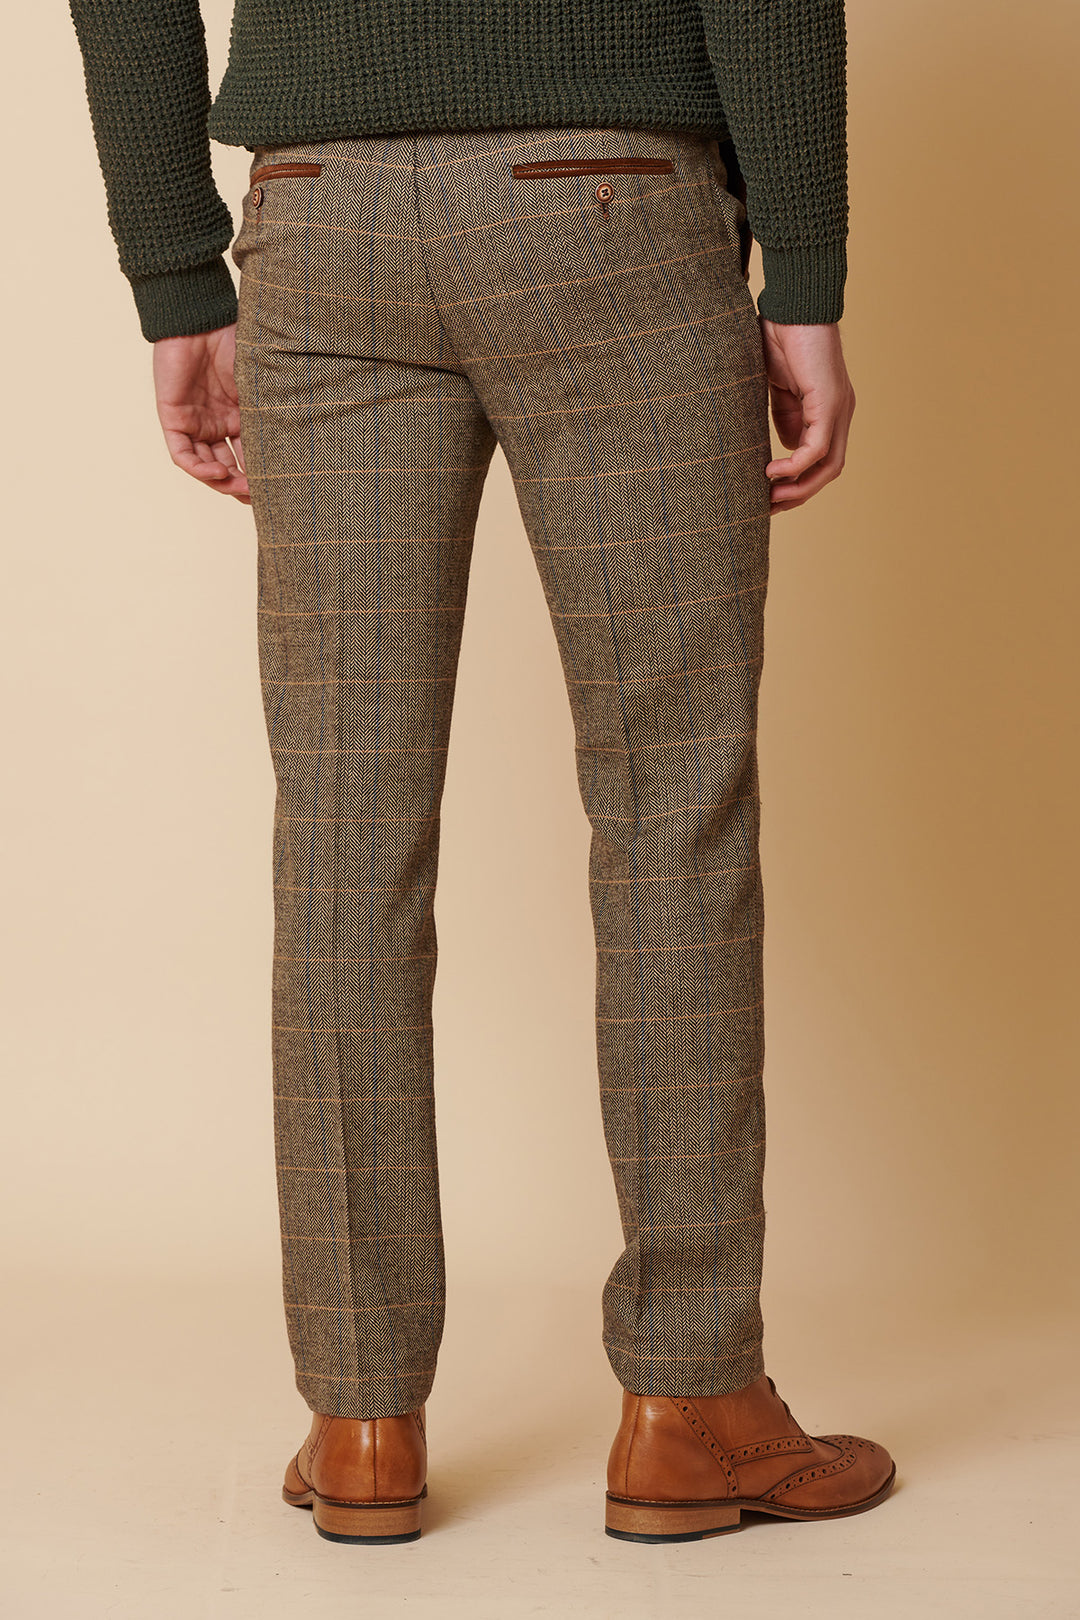 TED - Tan Tweed Check Trousers